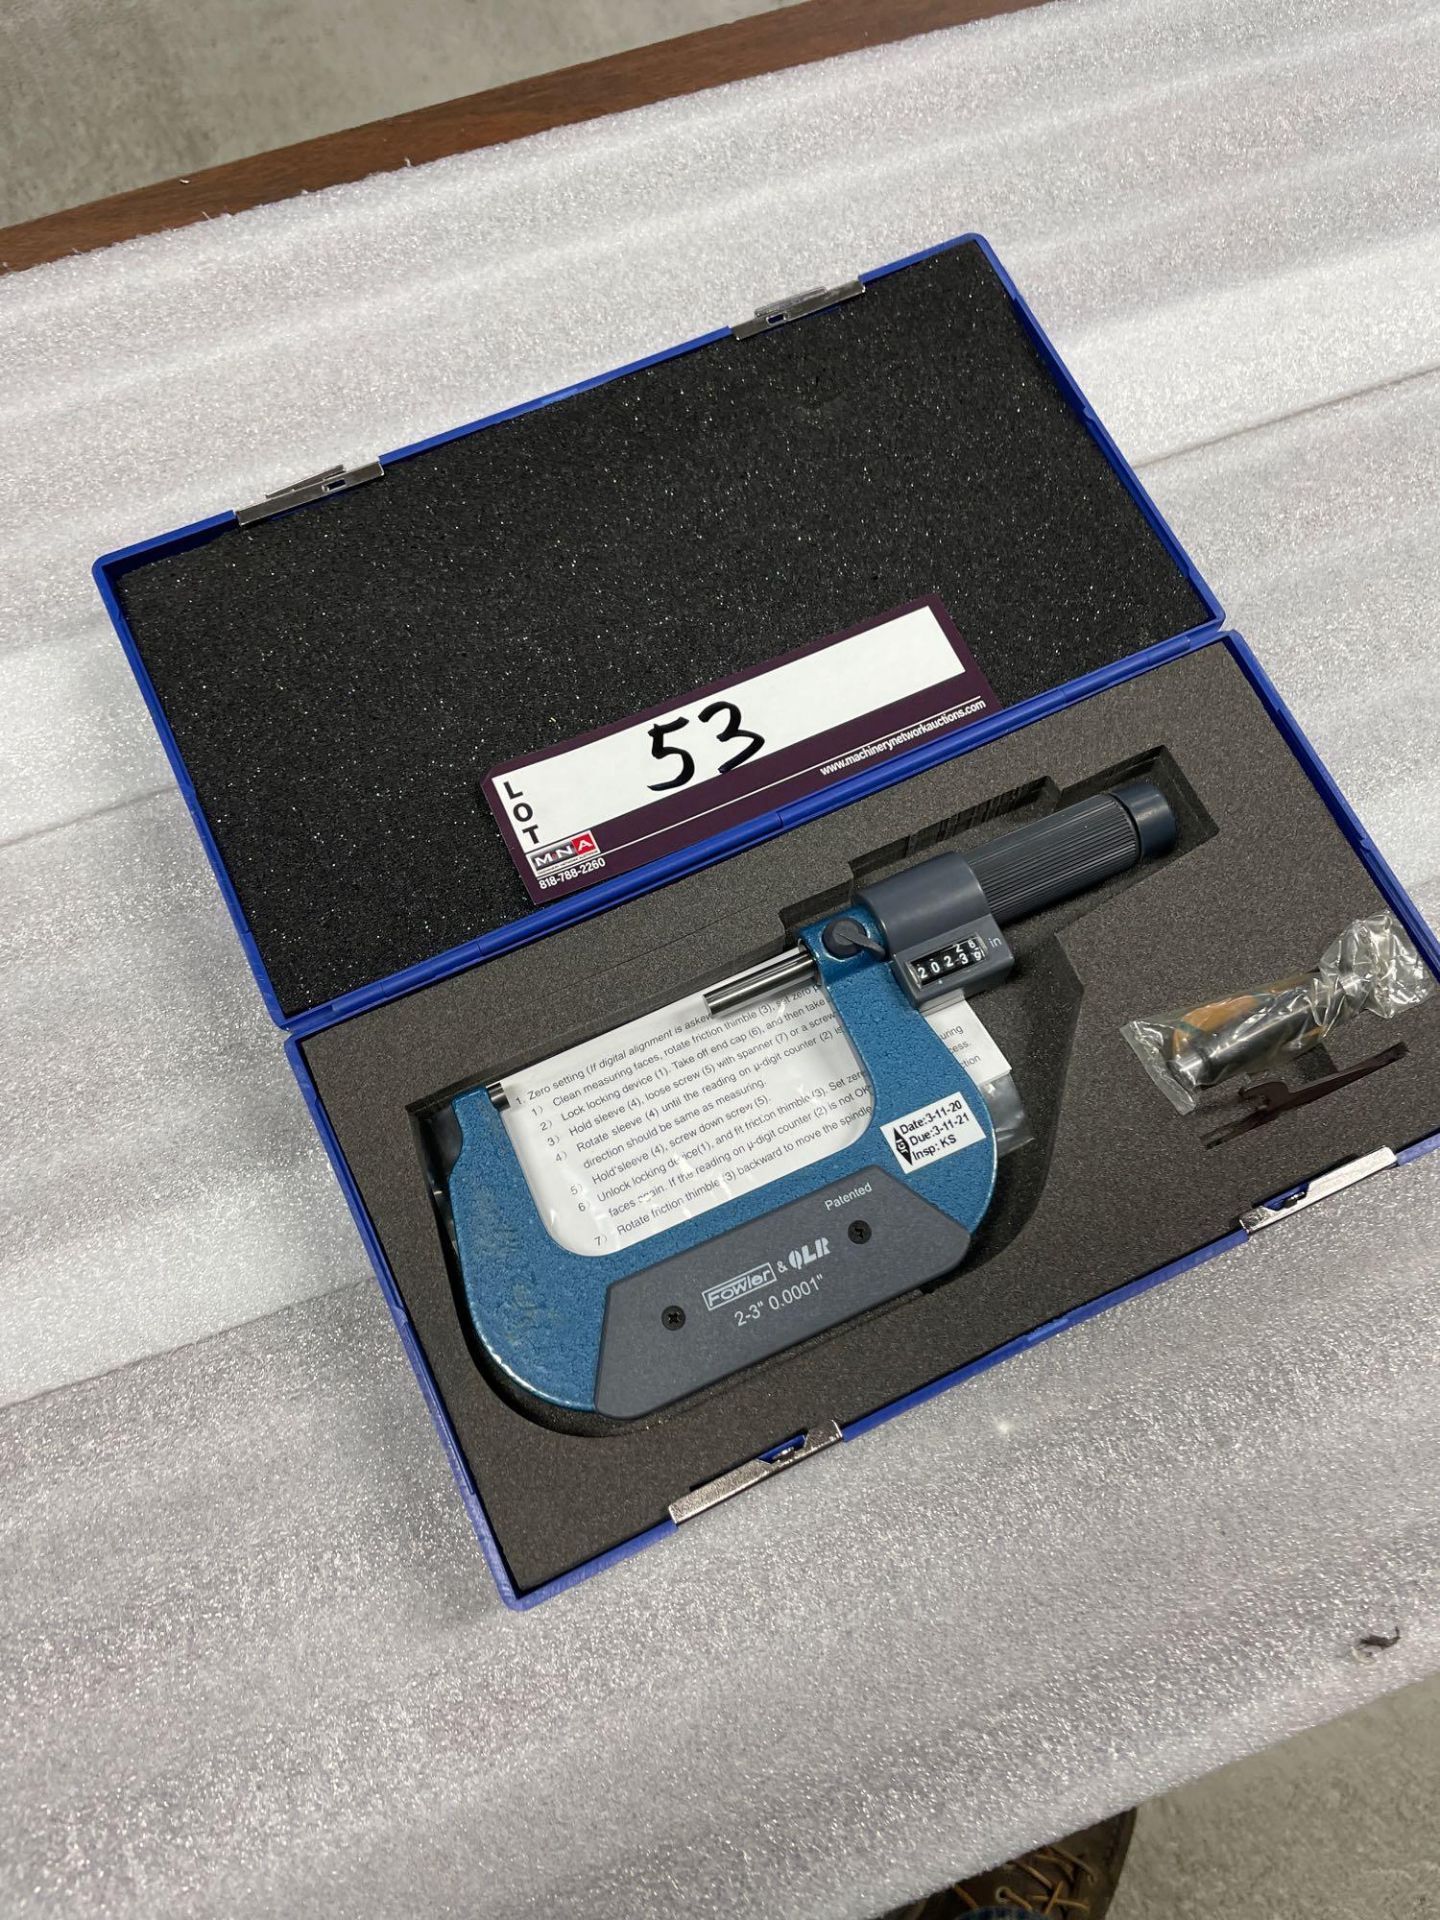 Fowler 2 - 3” Outside Micrometer - Image 2 of 3